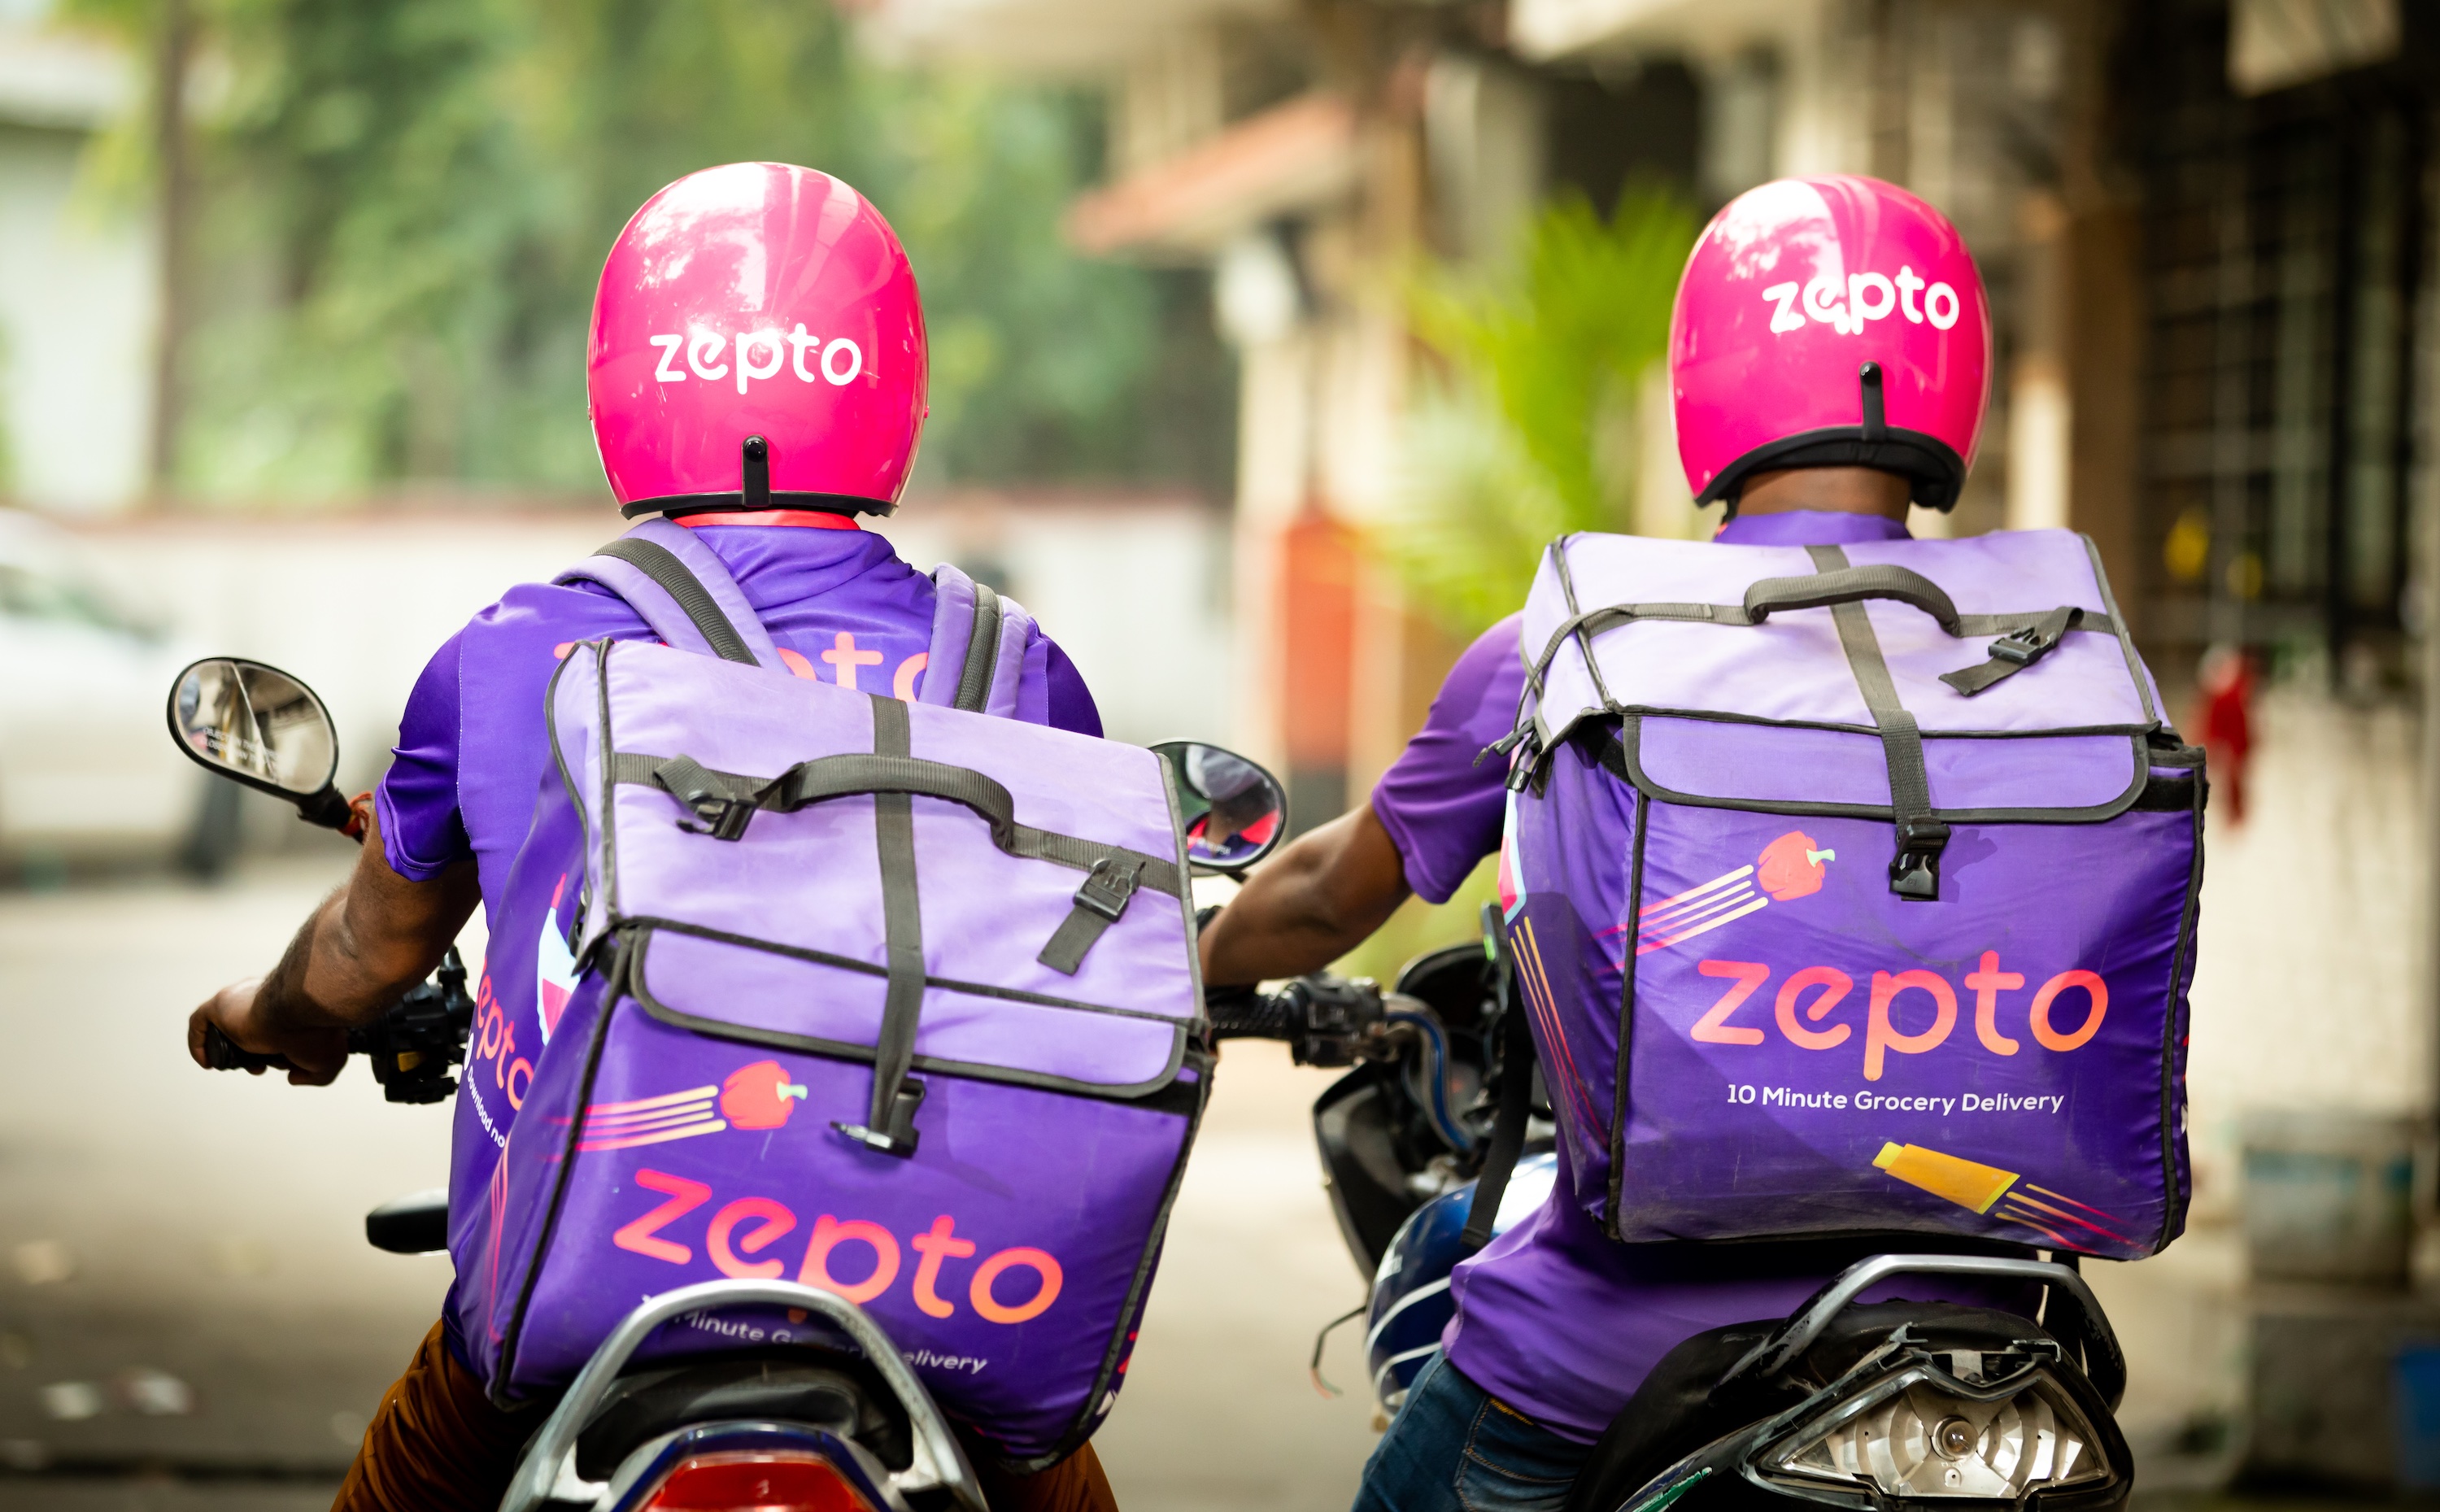 zepto, a 10-minute grocery delivery app in india, raises $100 million | techcrunch